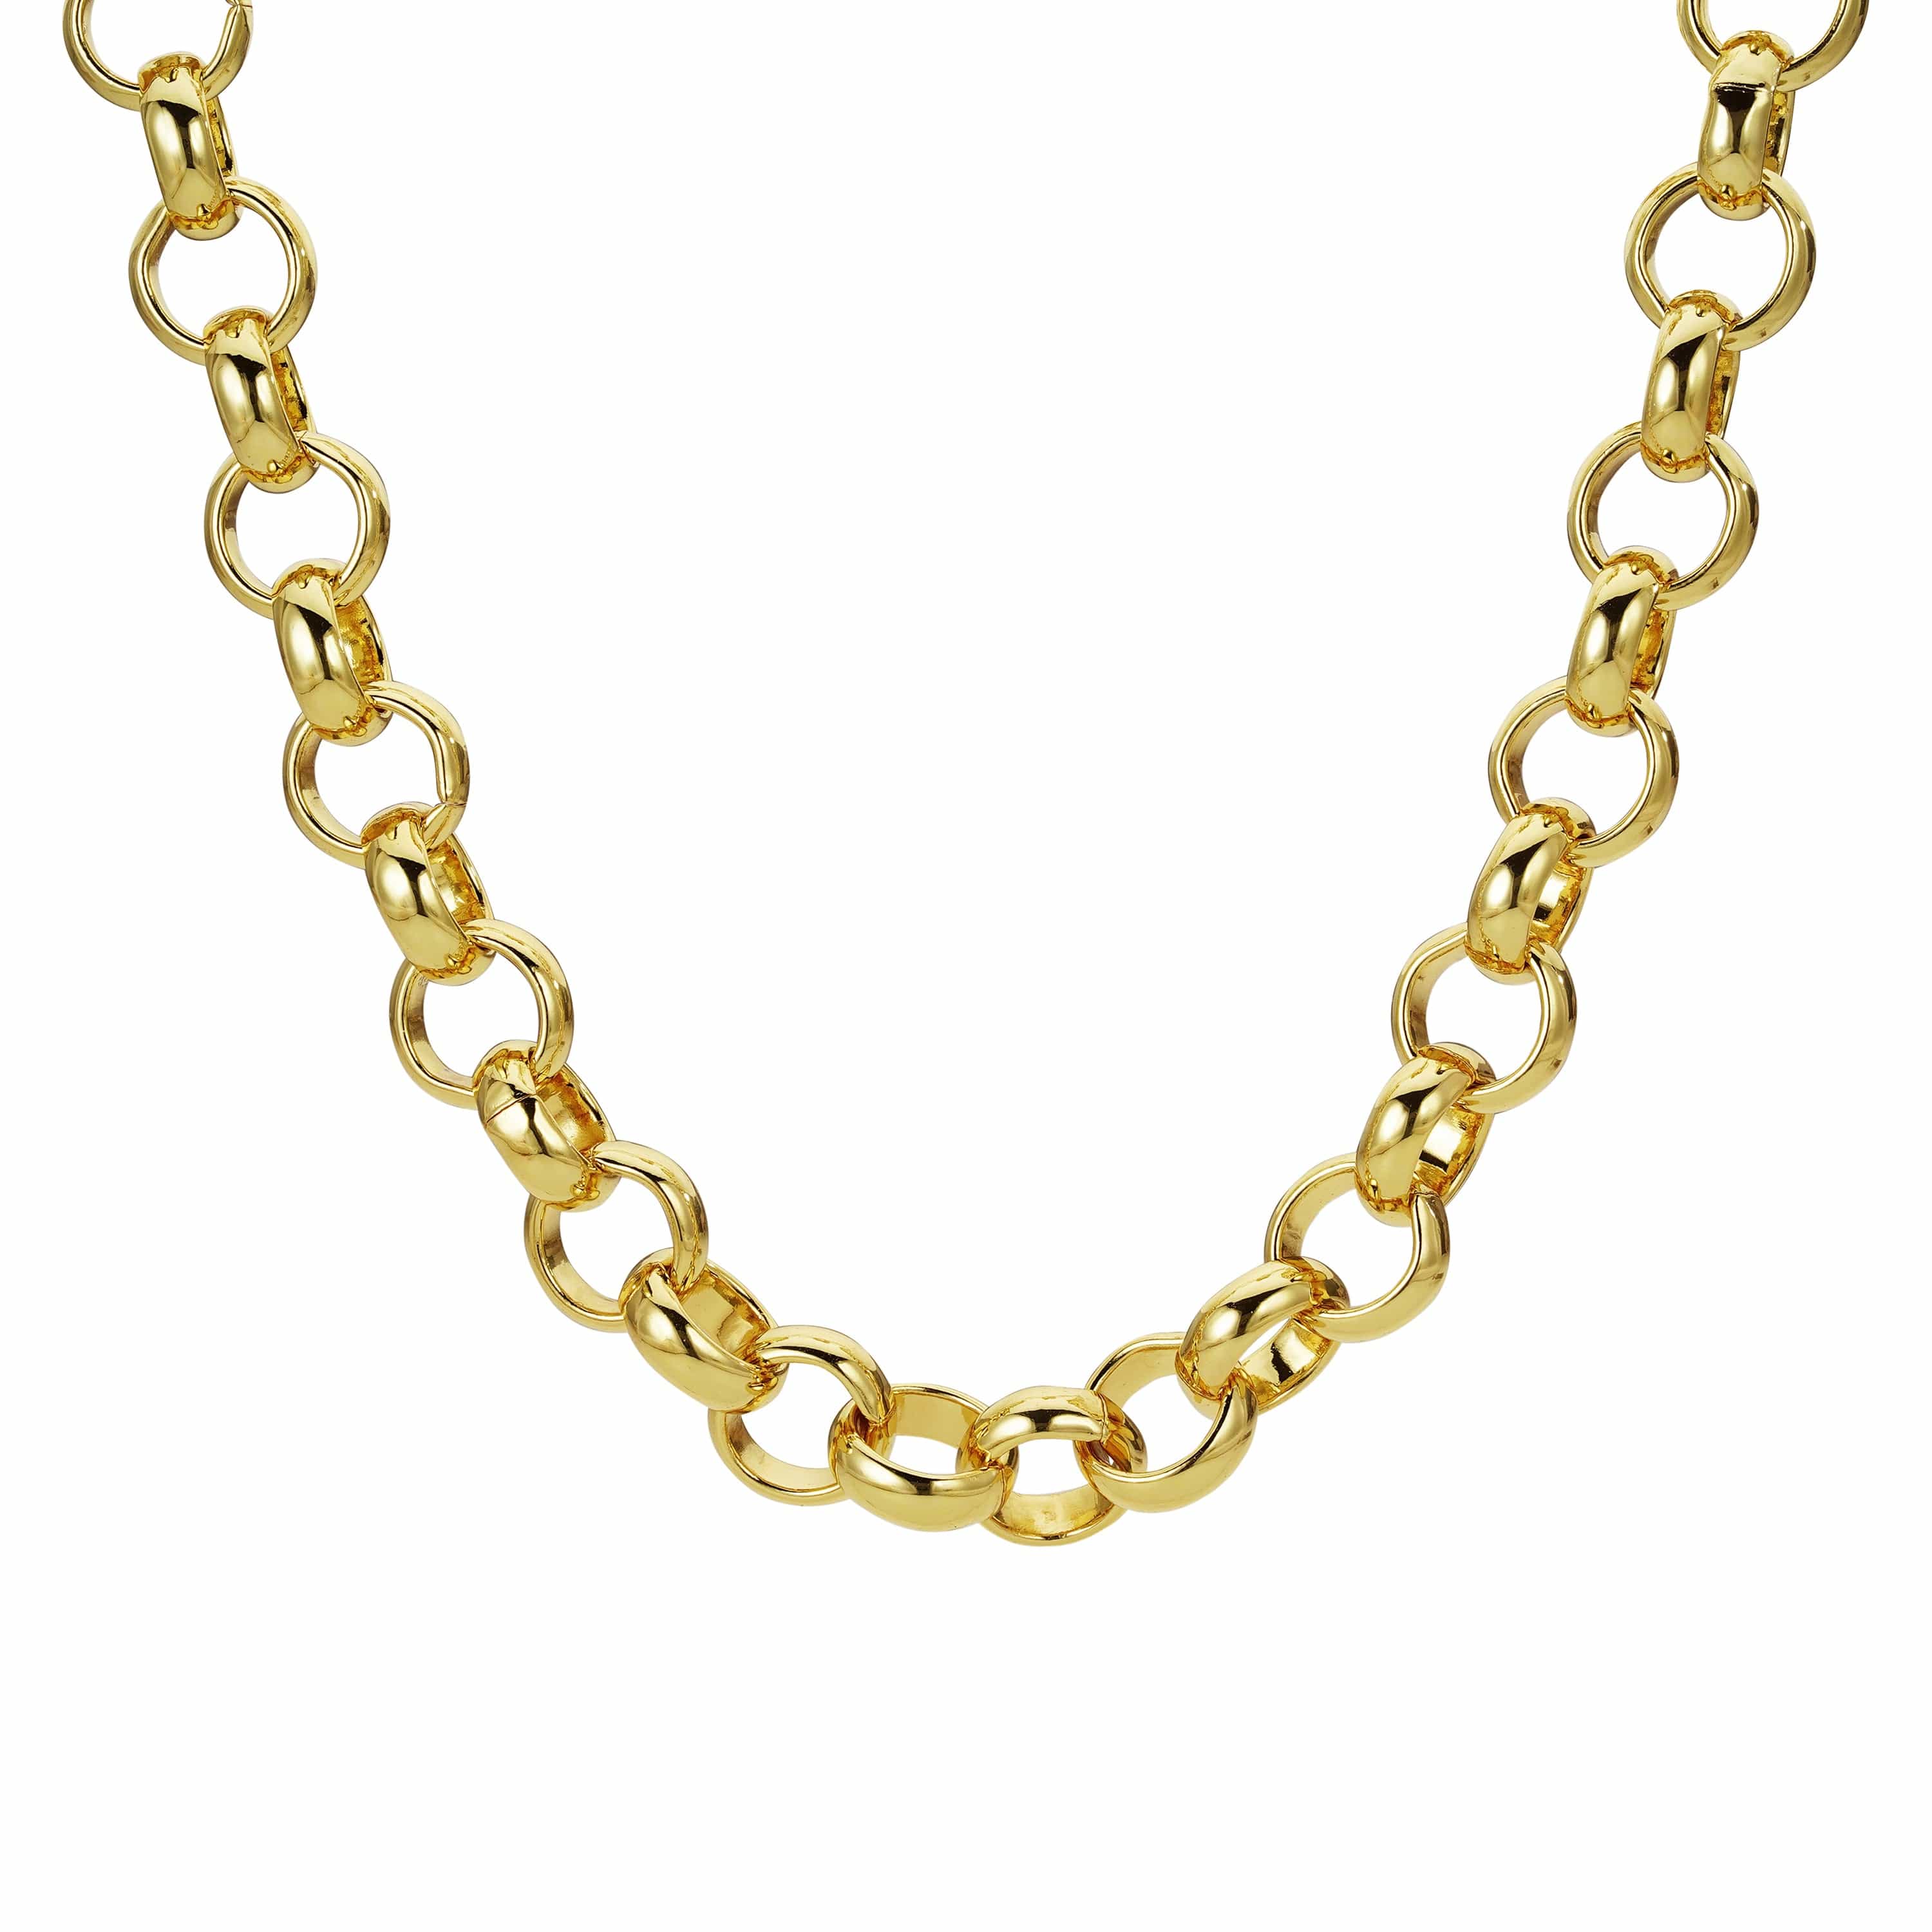 Buy 24kt Gold Plated Belcher Chain, 3MM Gold Plated Belcher Chain Online in  India - Etsy